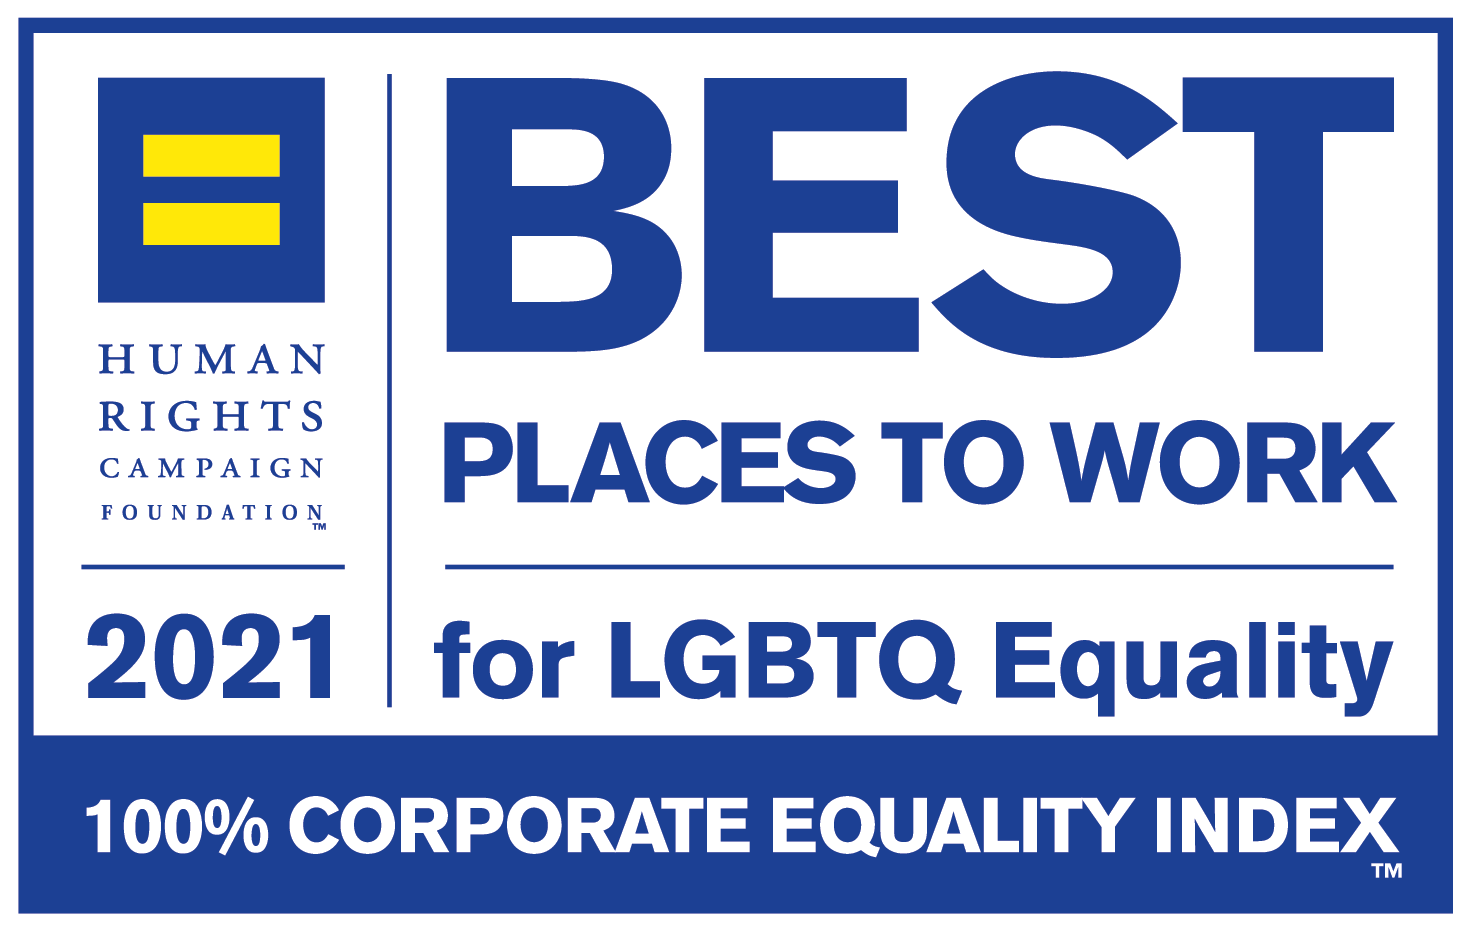 Corporate Equality Index Best Places to Work Award